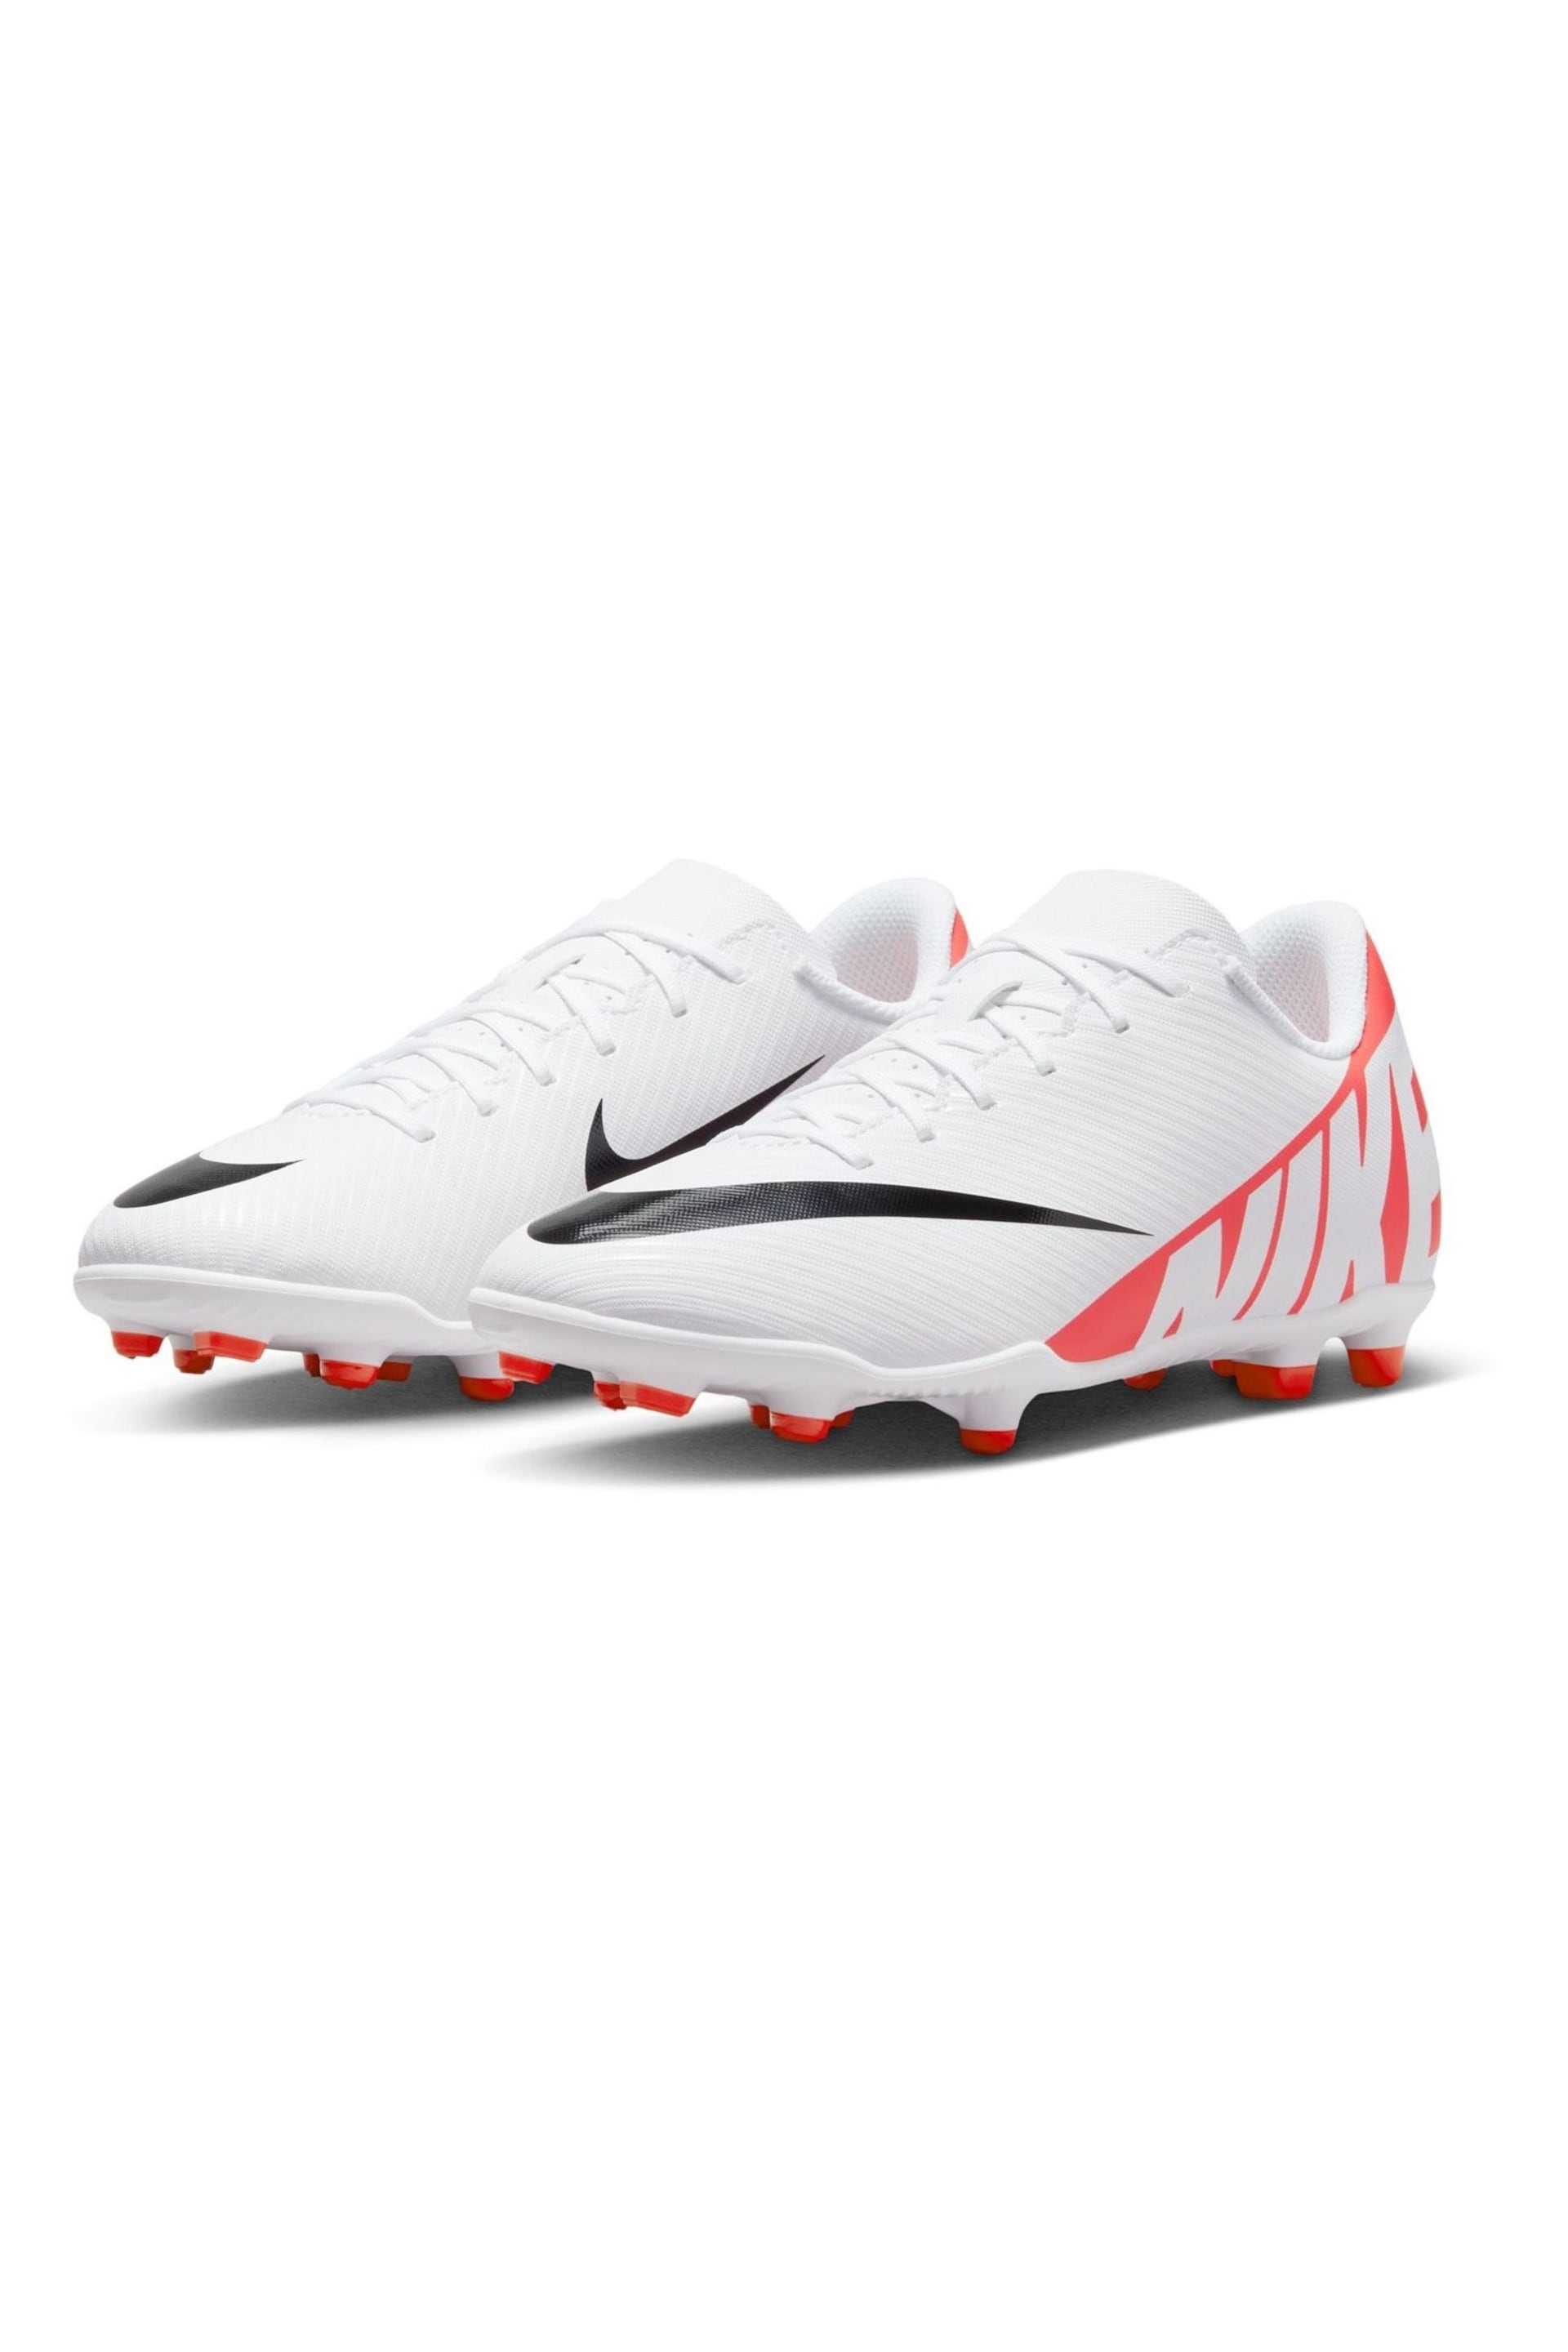 Nike Jr. Red Mercurial Vapor 15 Club Firm Ground Football Boots - Image 5 of 11